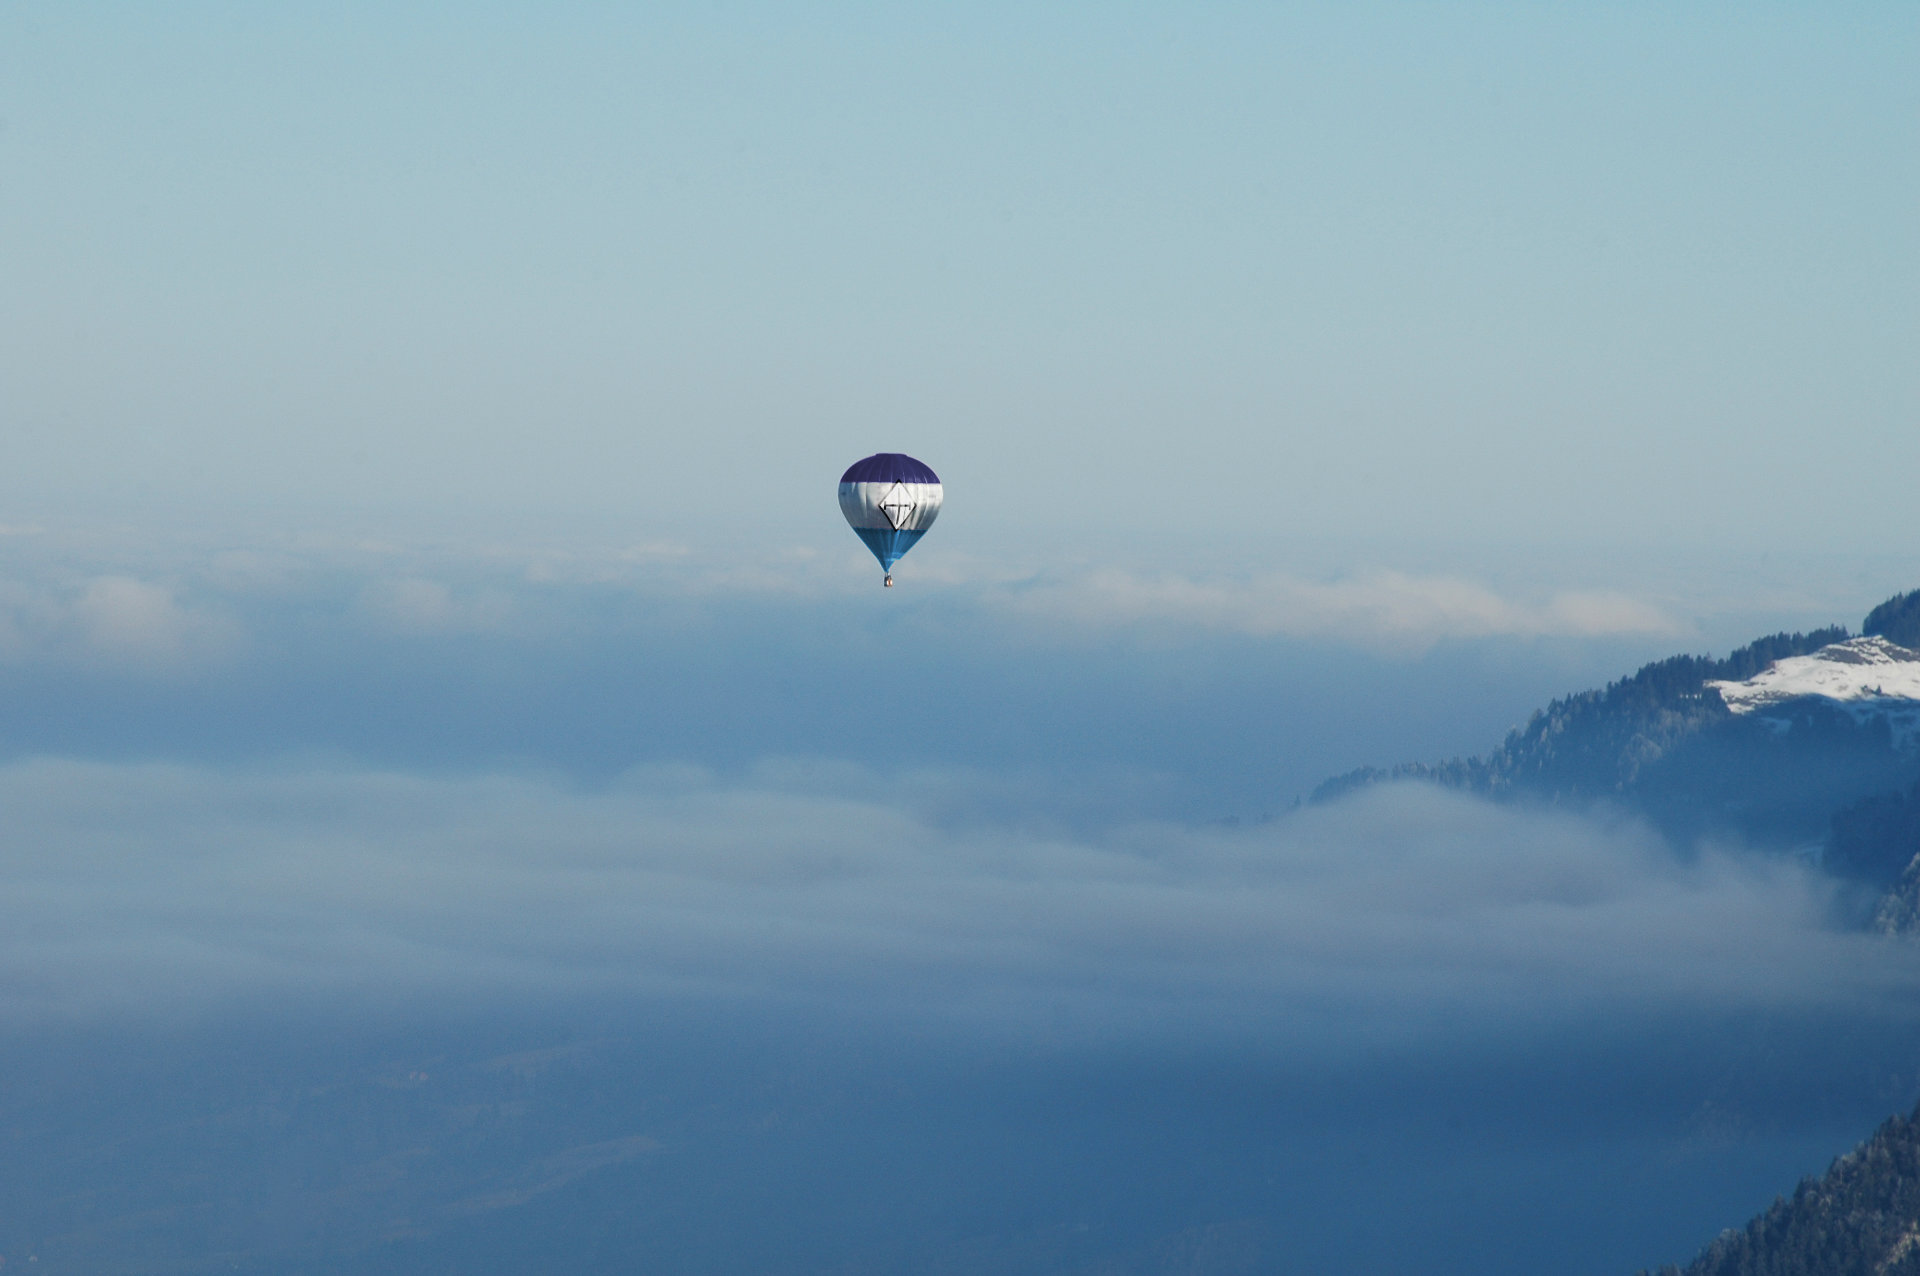 Hot air balloon with Upadaria flag pattern floats about misty mountains